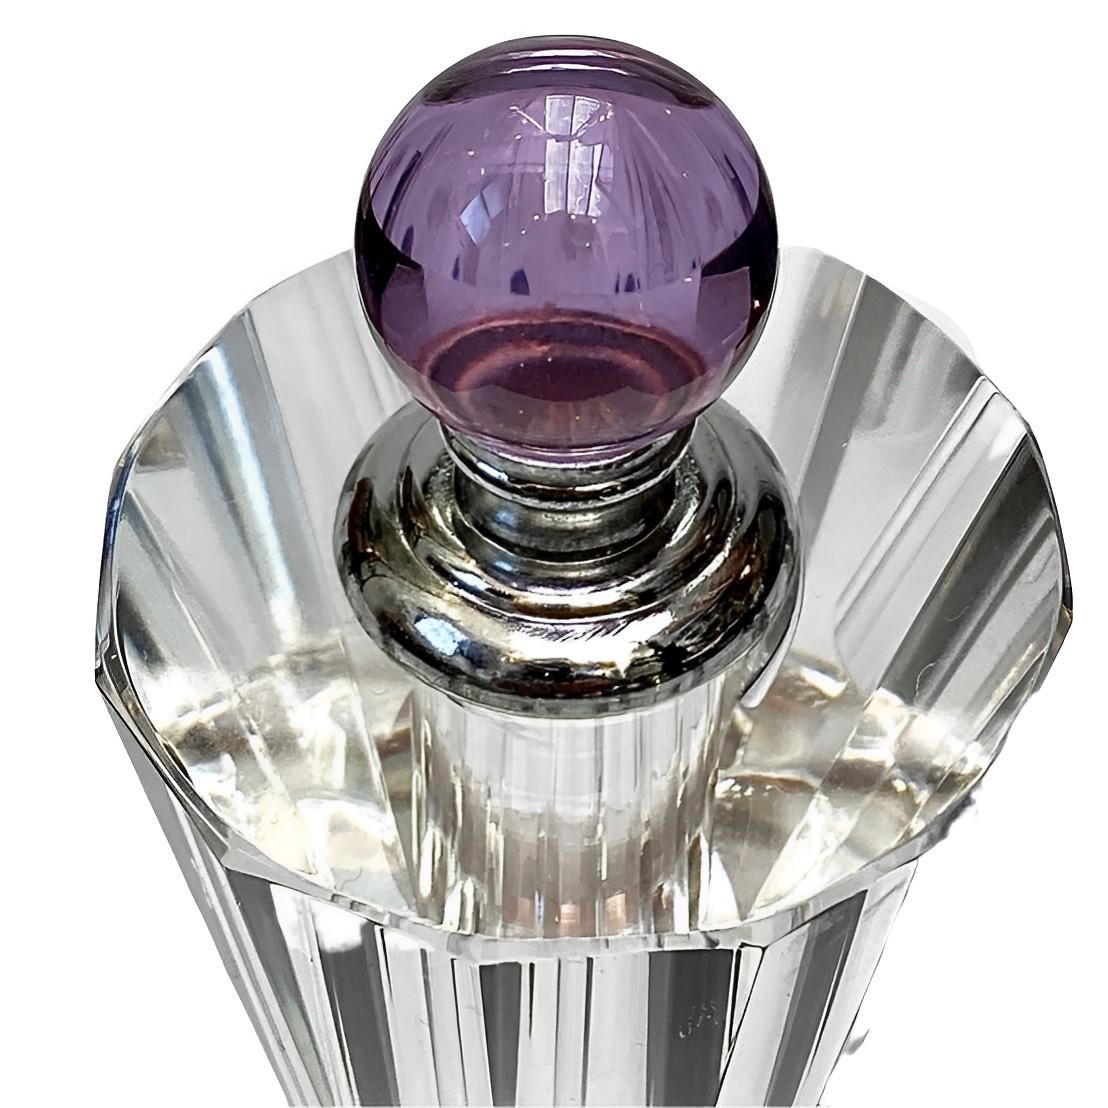 
Fabulous large lead crystal perfume bottle with a silver tone and lilac ball top, and featuring a ball base with bubbles inside. Measuring height 17 cm / 6.6 inches by diameter at the top 5.8 cm / 2.28 inches. The perfume bottle is in very good